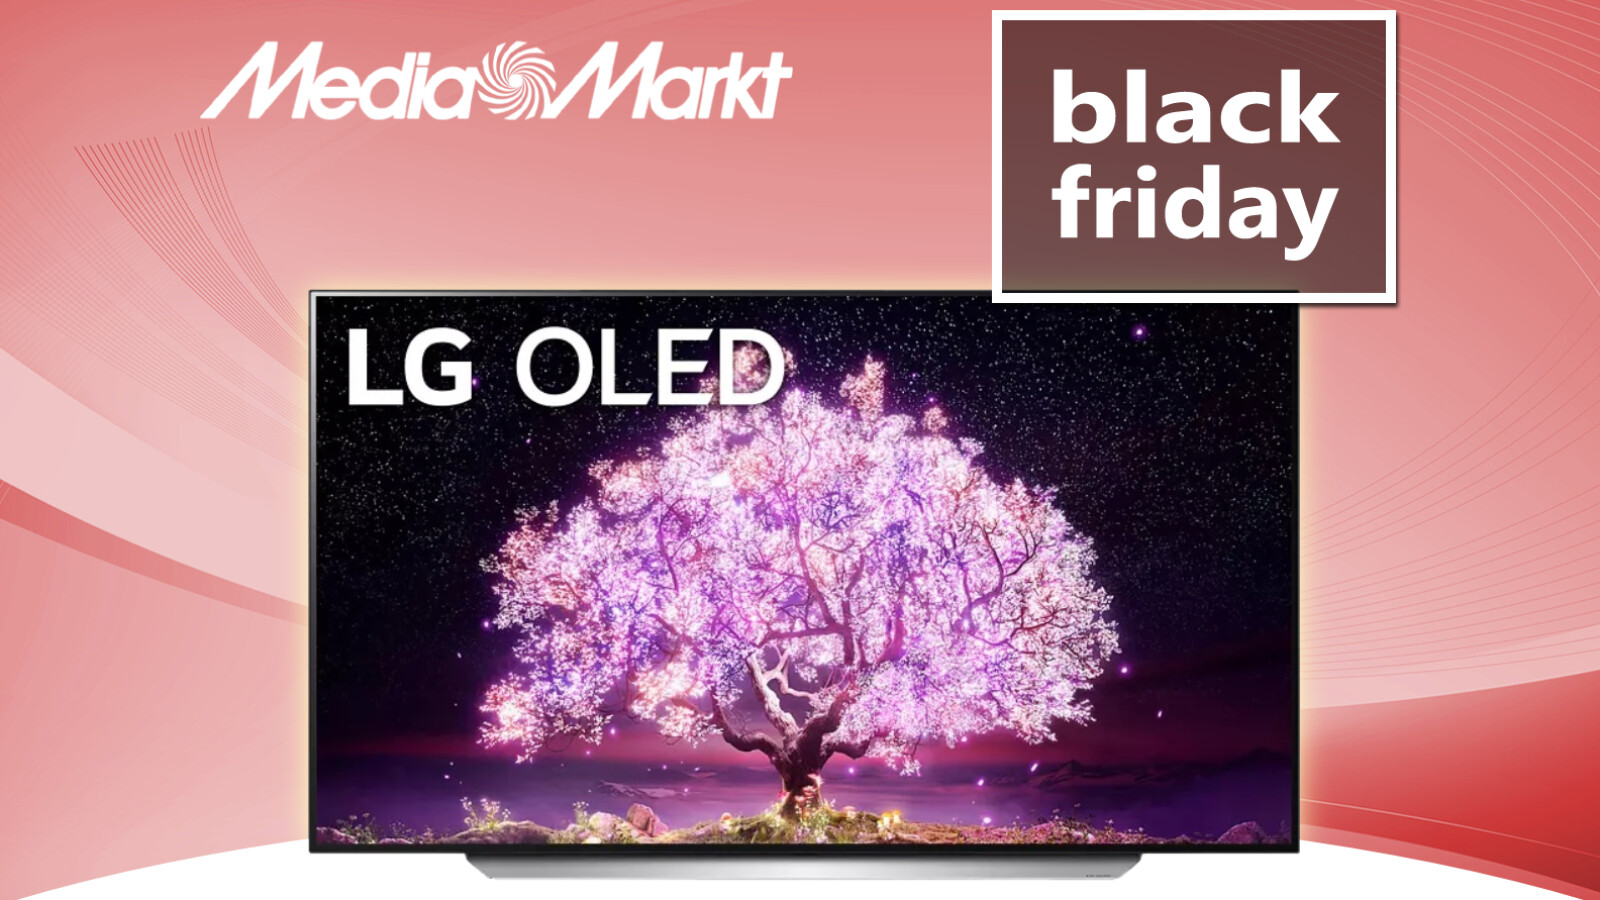 LG C1 OLED TV: The PS5-compatible in the Media Markt Black Friday deal - iGamesNews